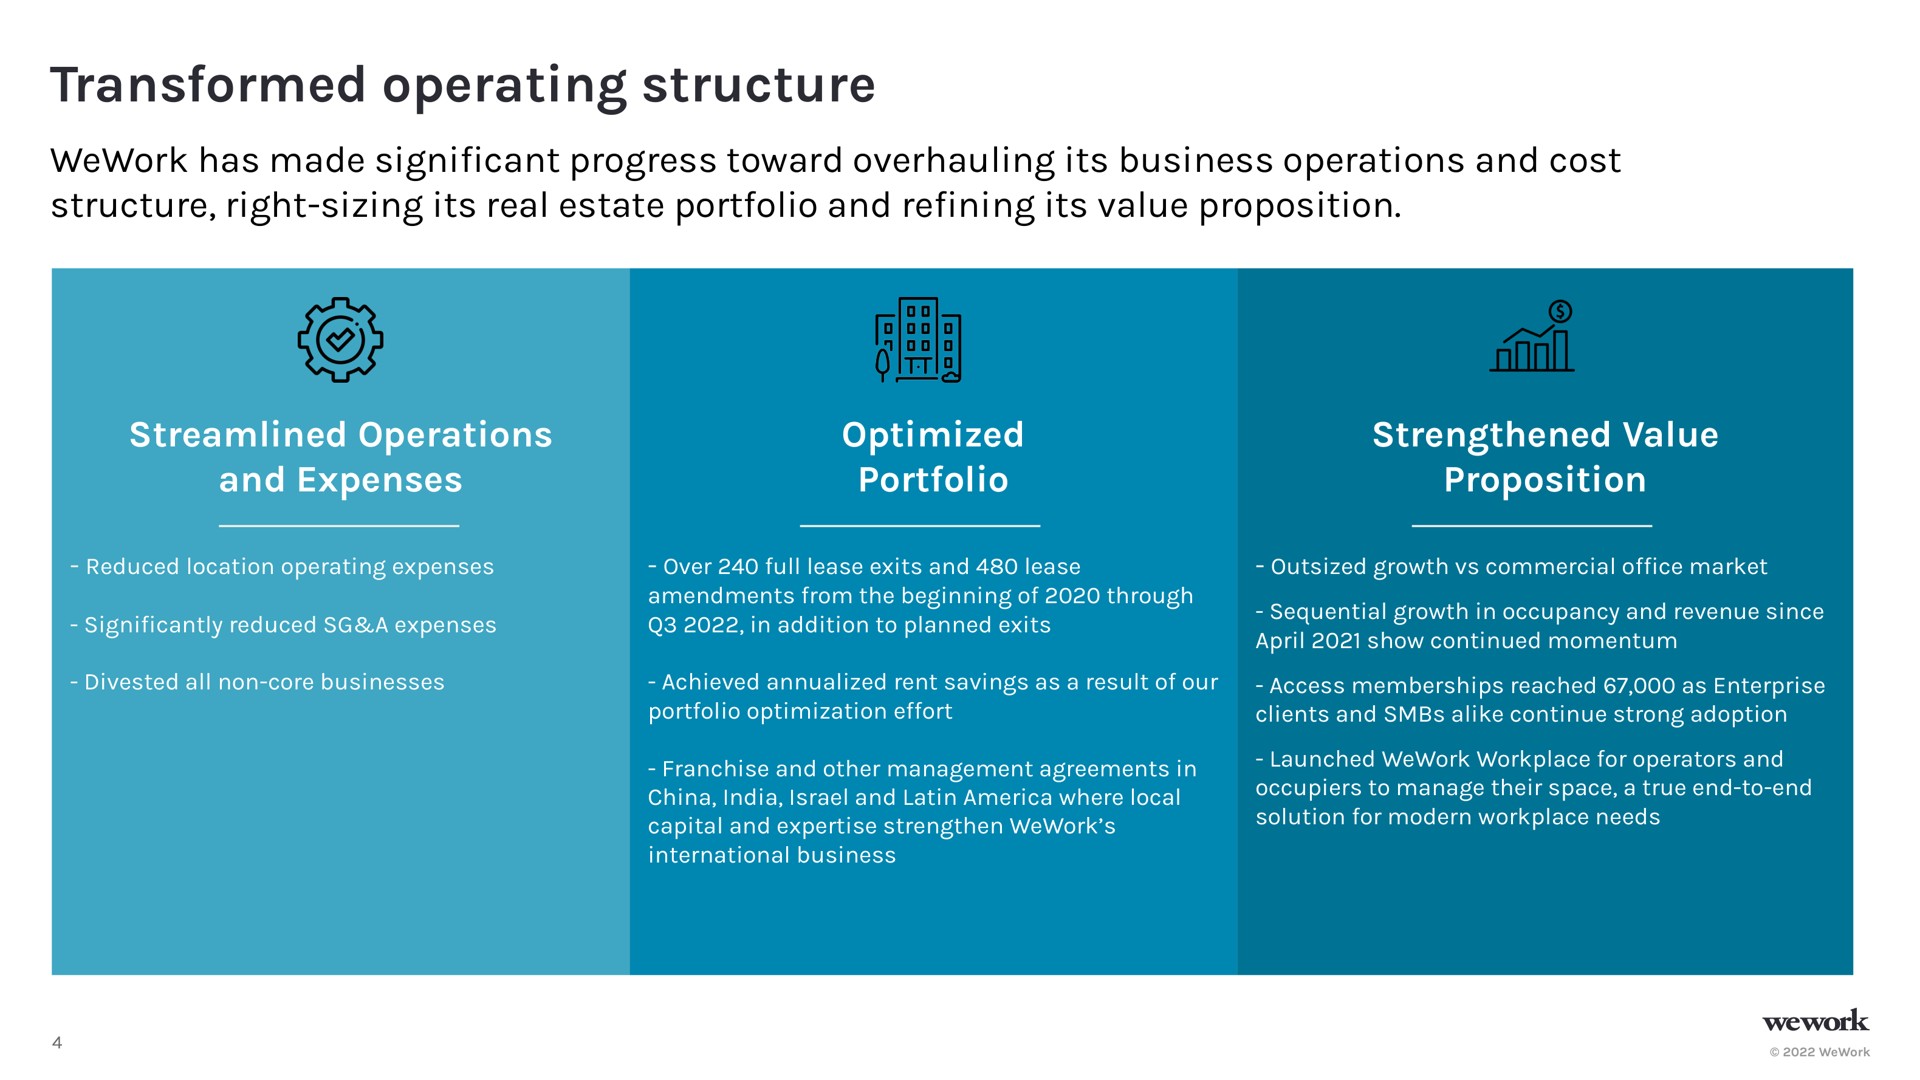 transformed operating structure has made cant progress toward overhauling its business operations and cost structure right sizing its real estate portfolio and its value proposition streamlined operations and expenses optimized portfolio strengthened value proposition | WeWork